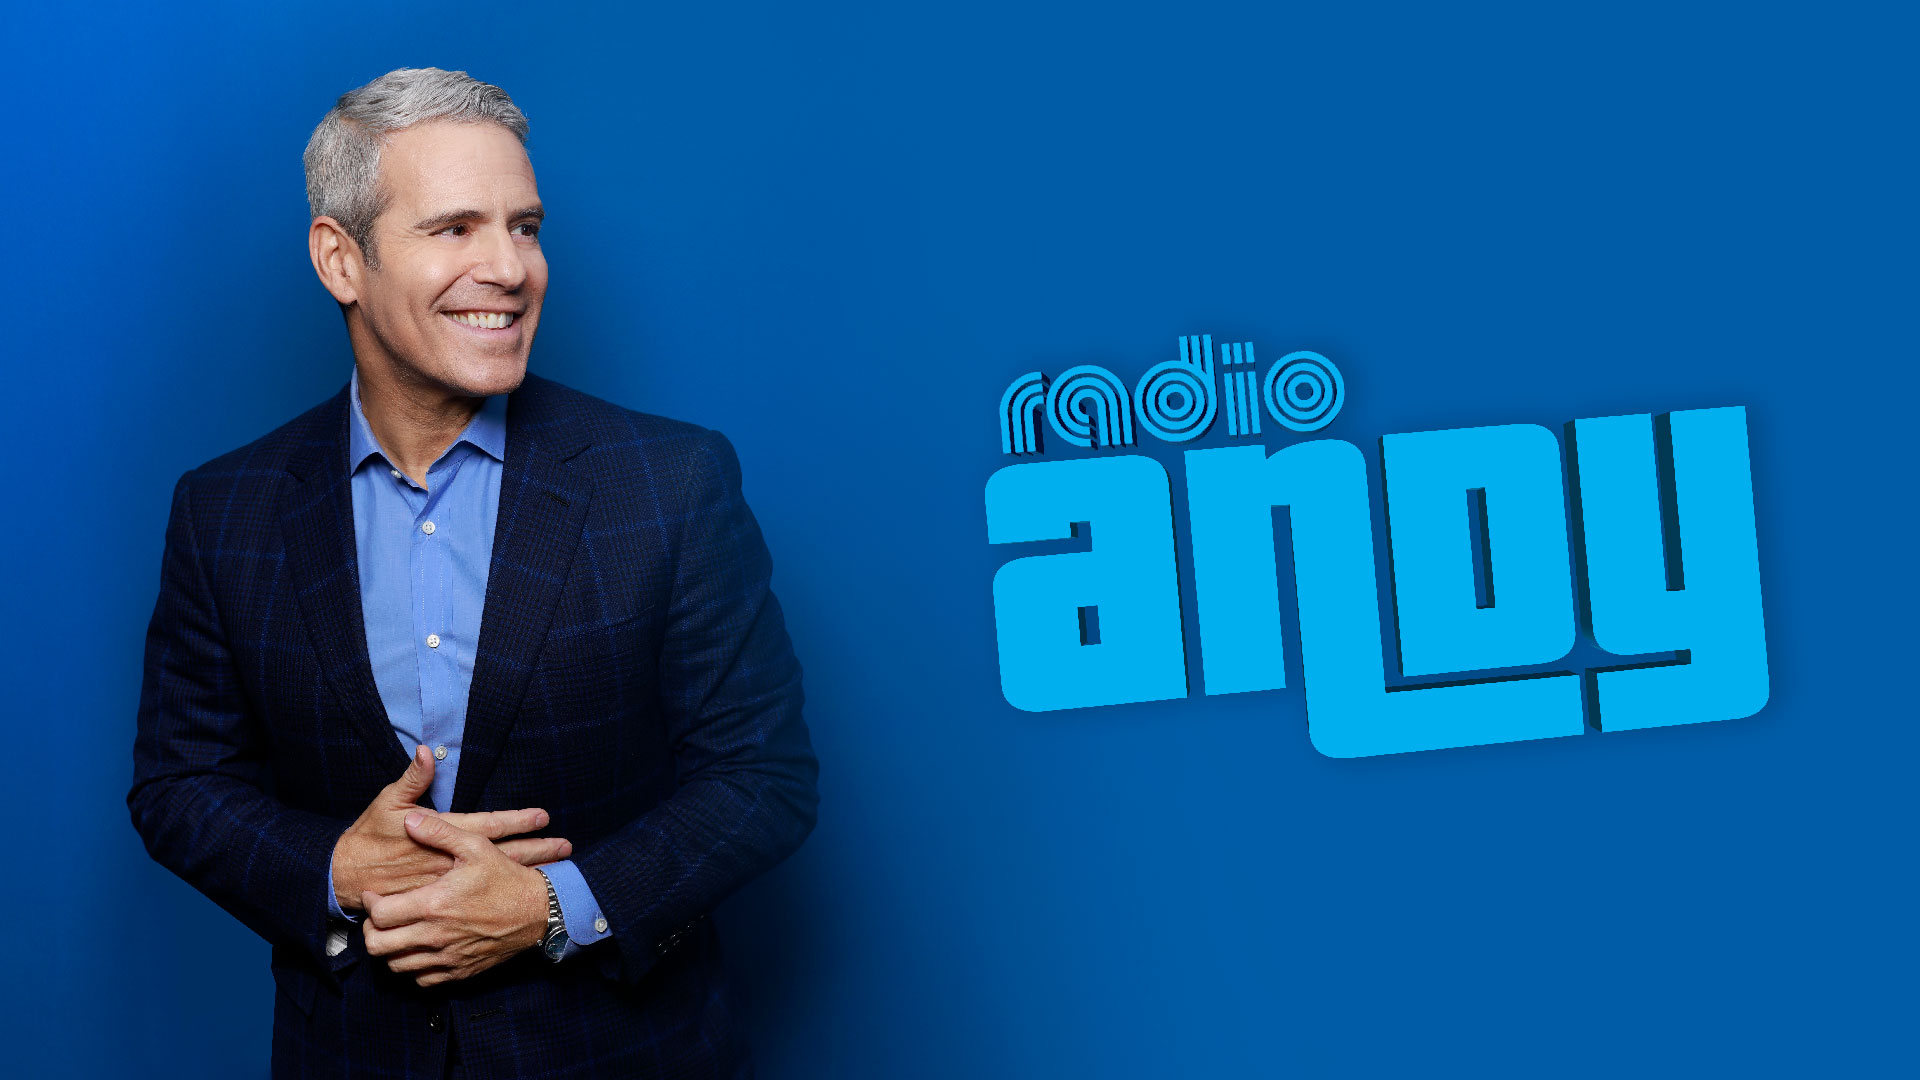 Andy Cohen on Radio Andy